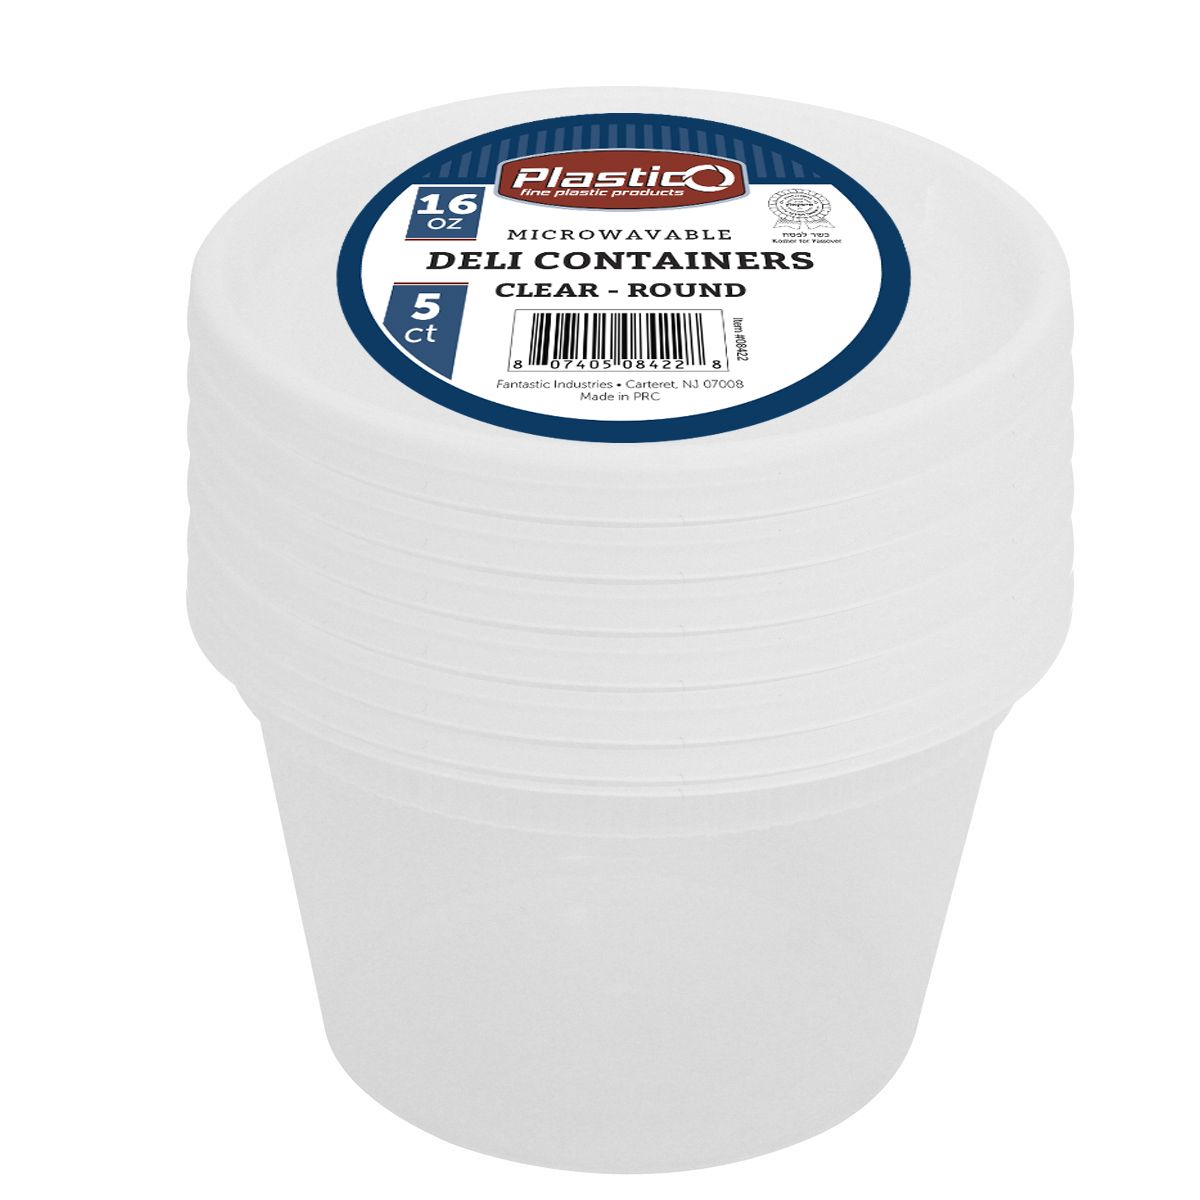 Plastico16 oz. Packed Soup Container w/ Lid - 5 ct.